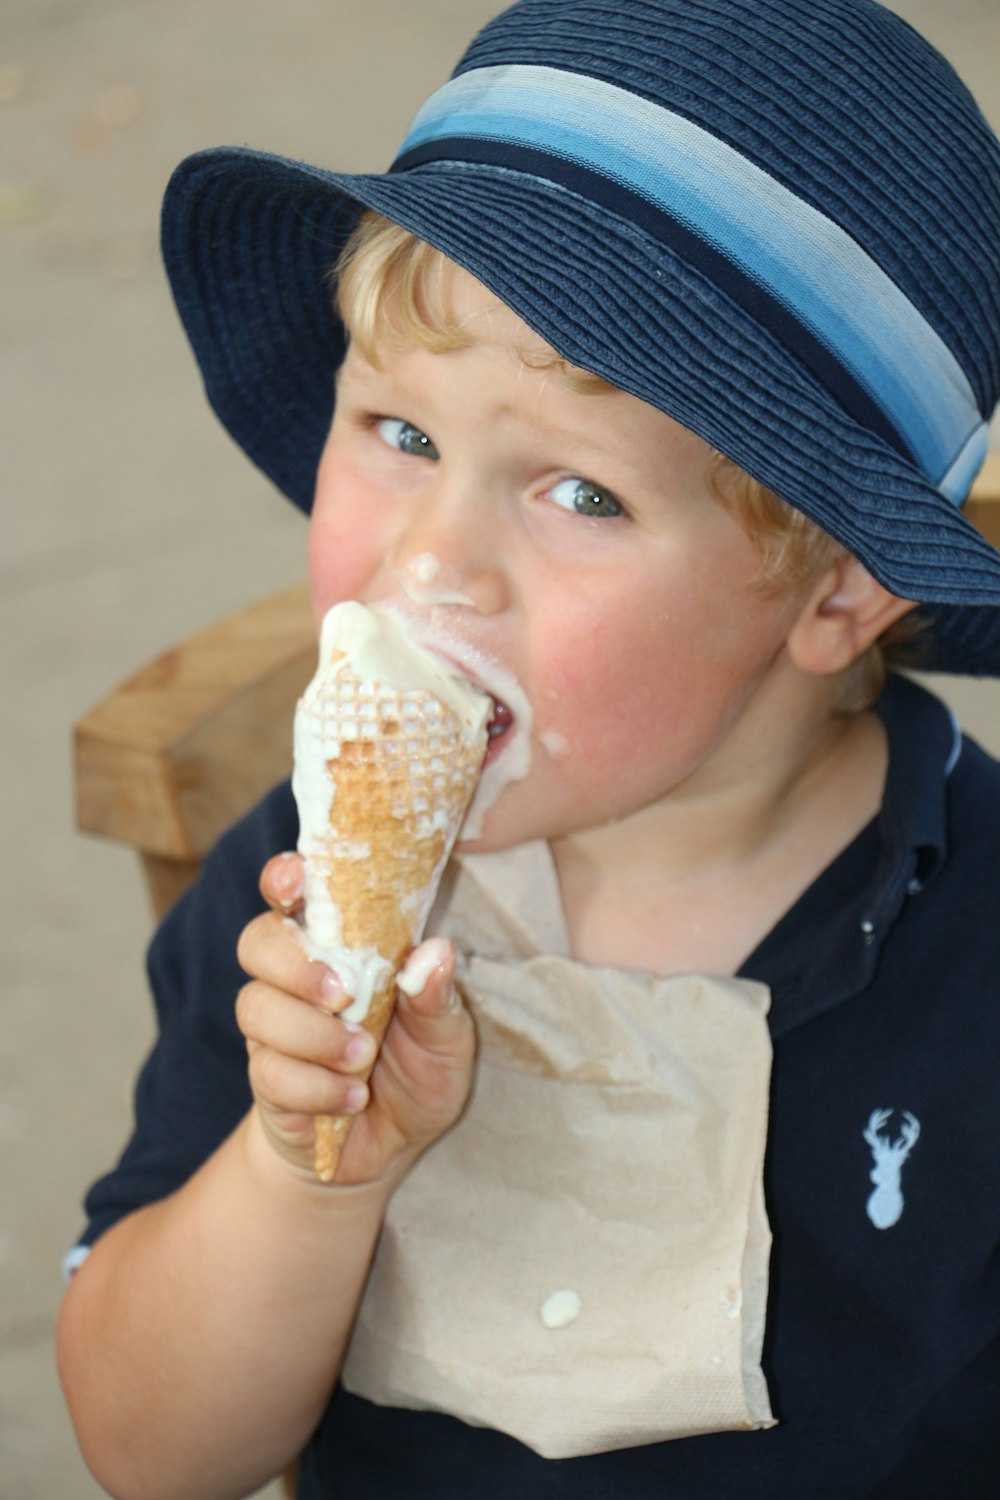 toddler eating ice cream with cone